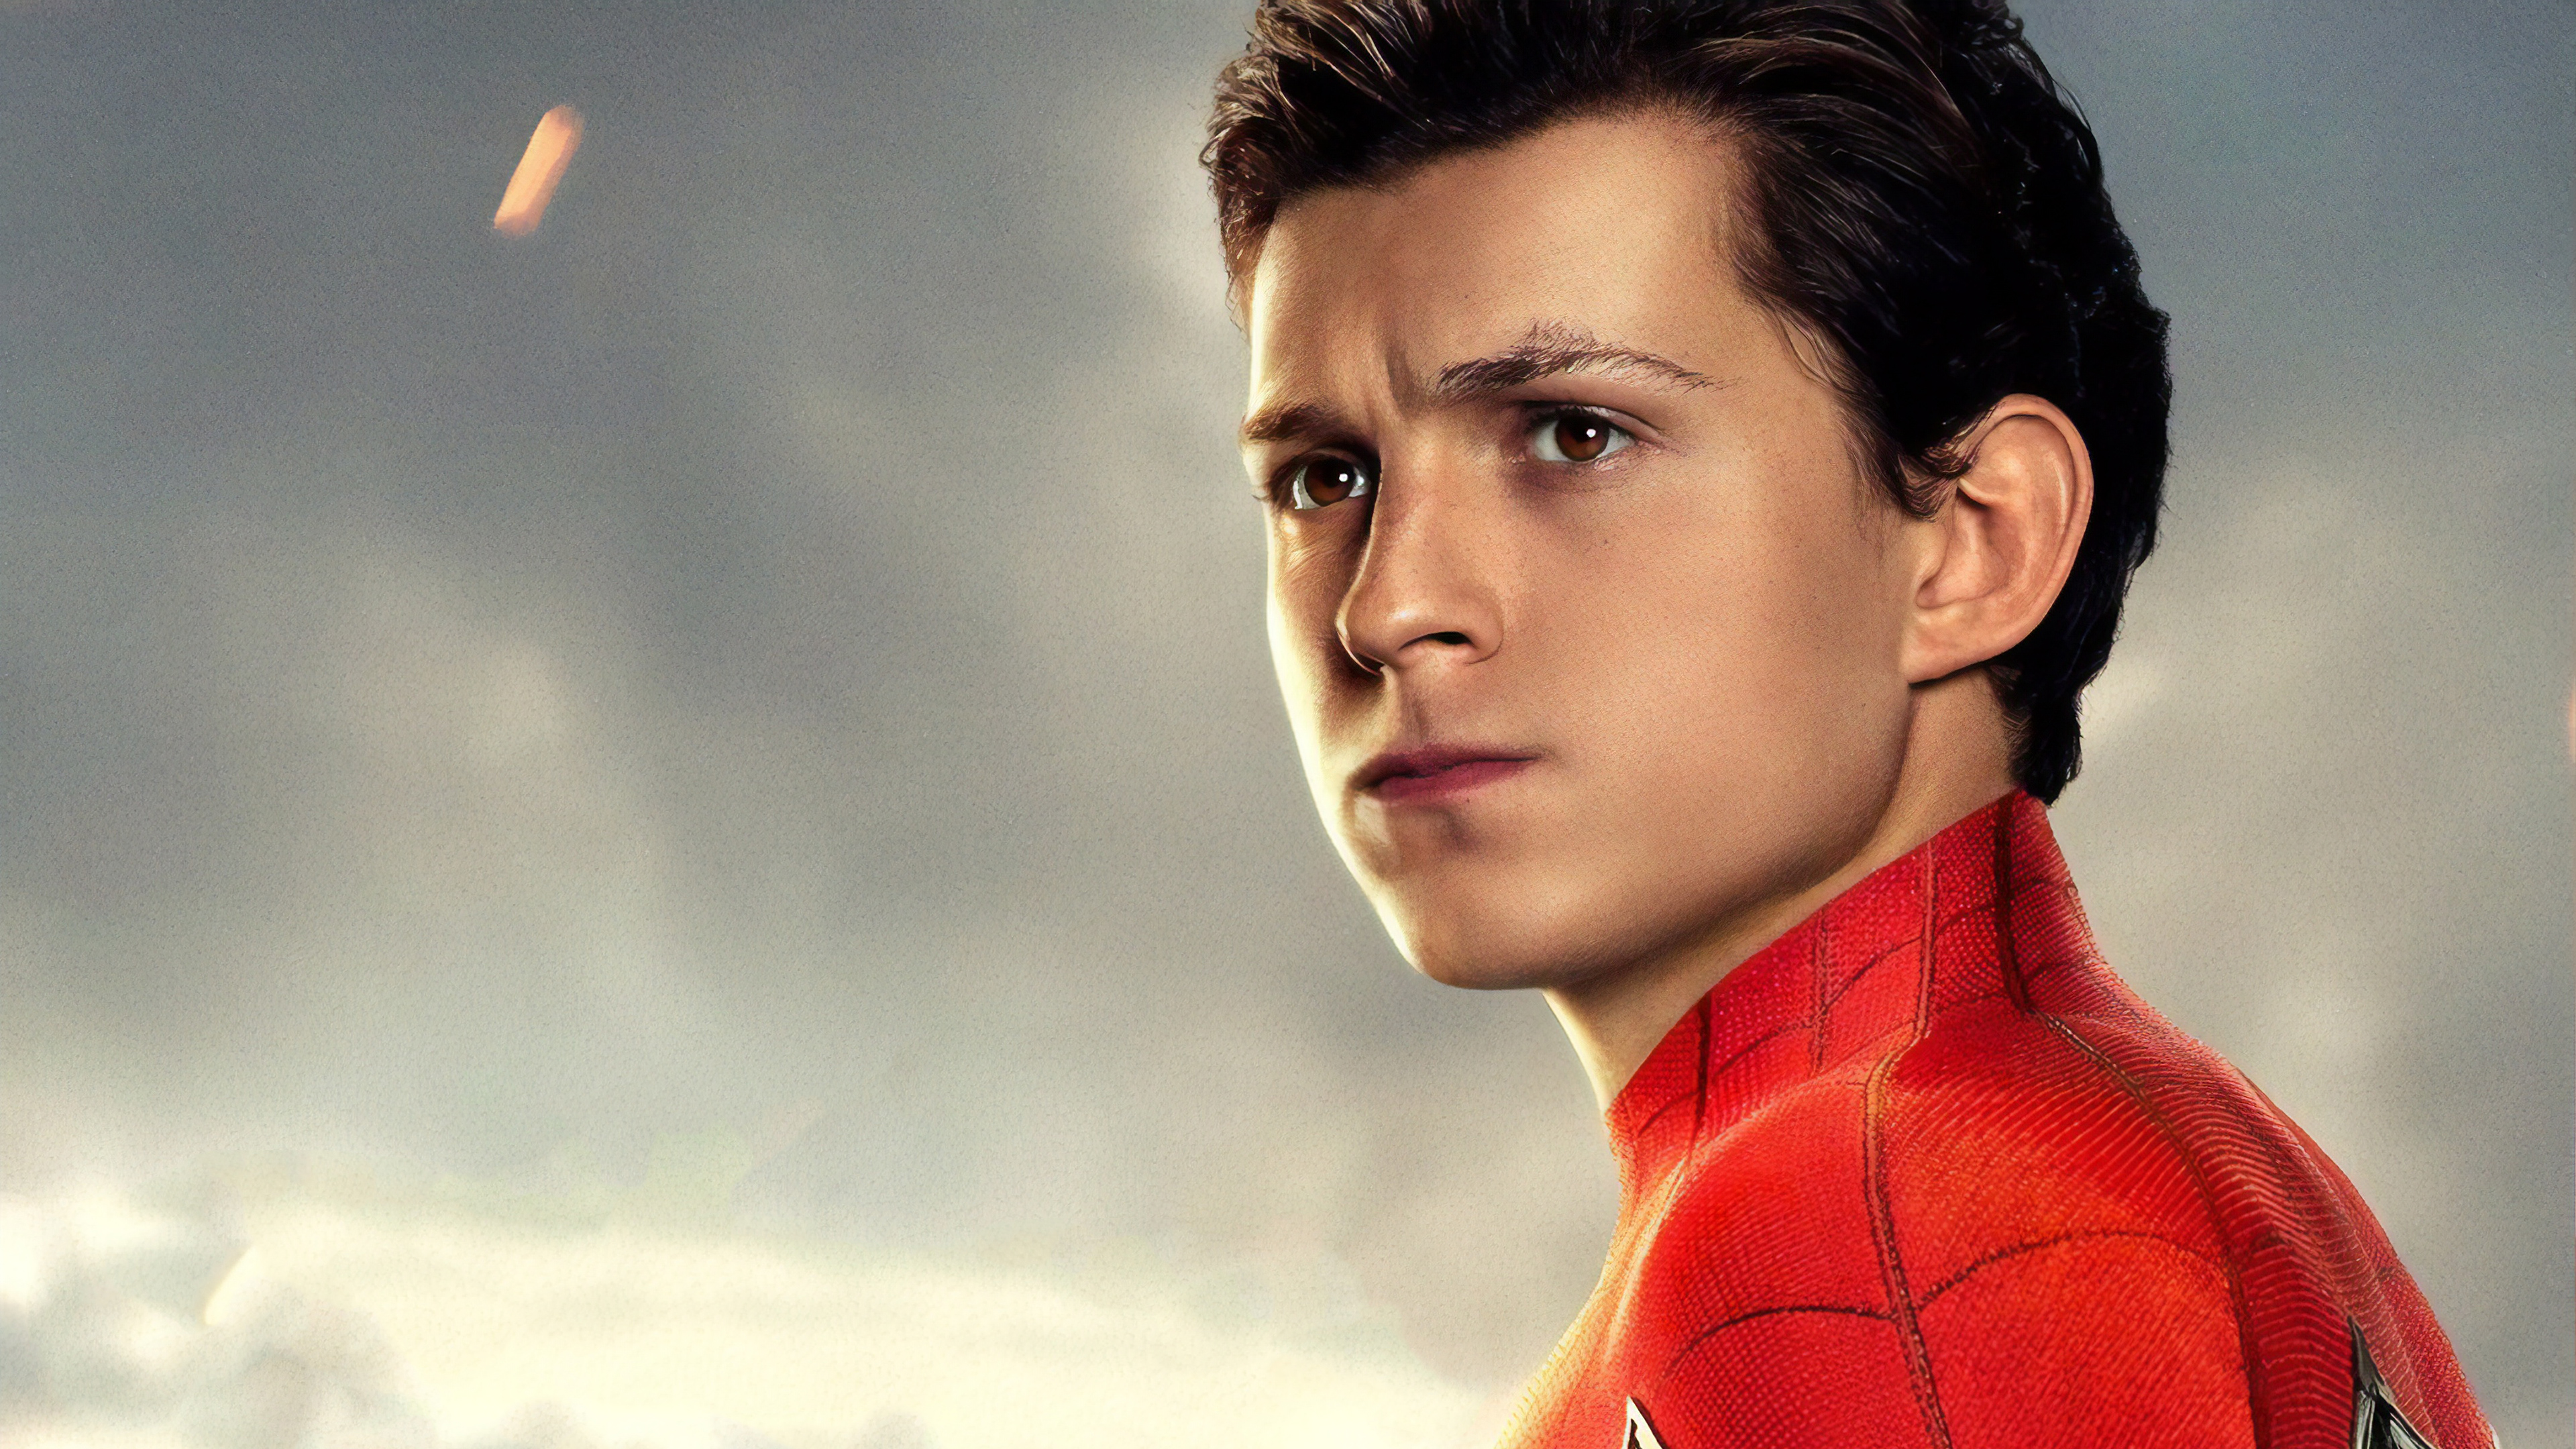 Tom Holland As Peter Parker Spider Man Far From Home Poster, HD Movies, 4k Wallpaper, Image, Background, Photo and Picture